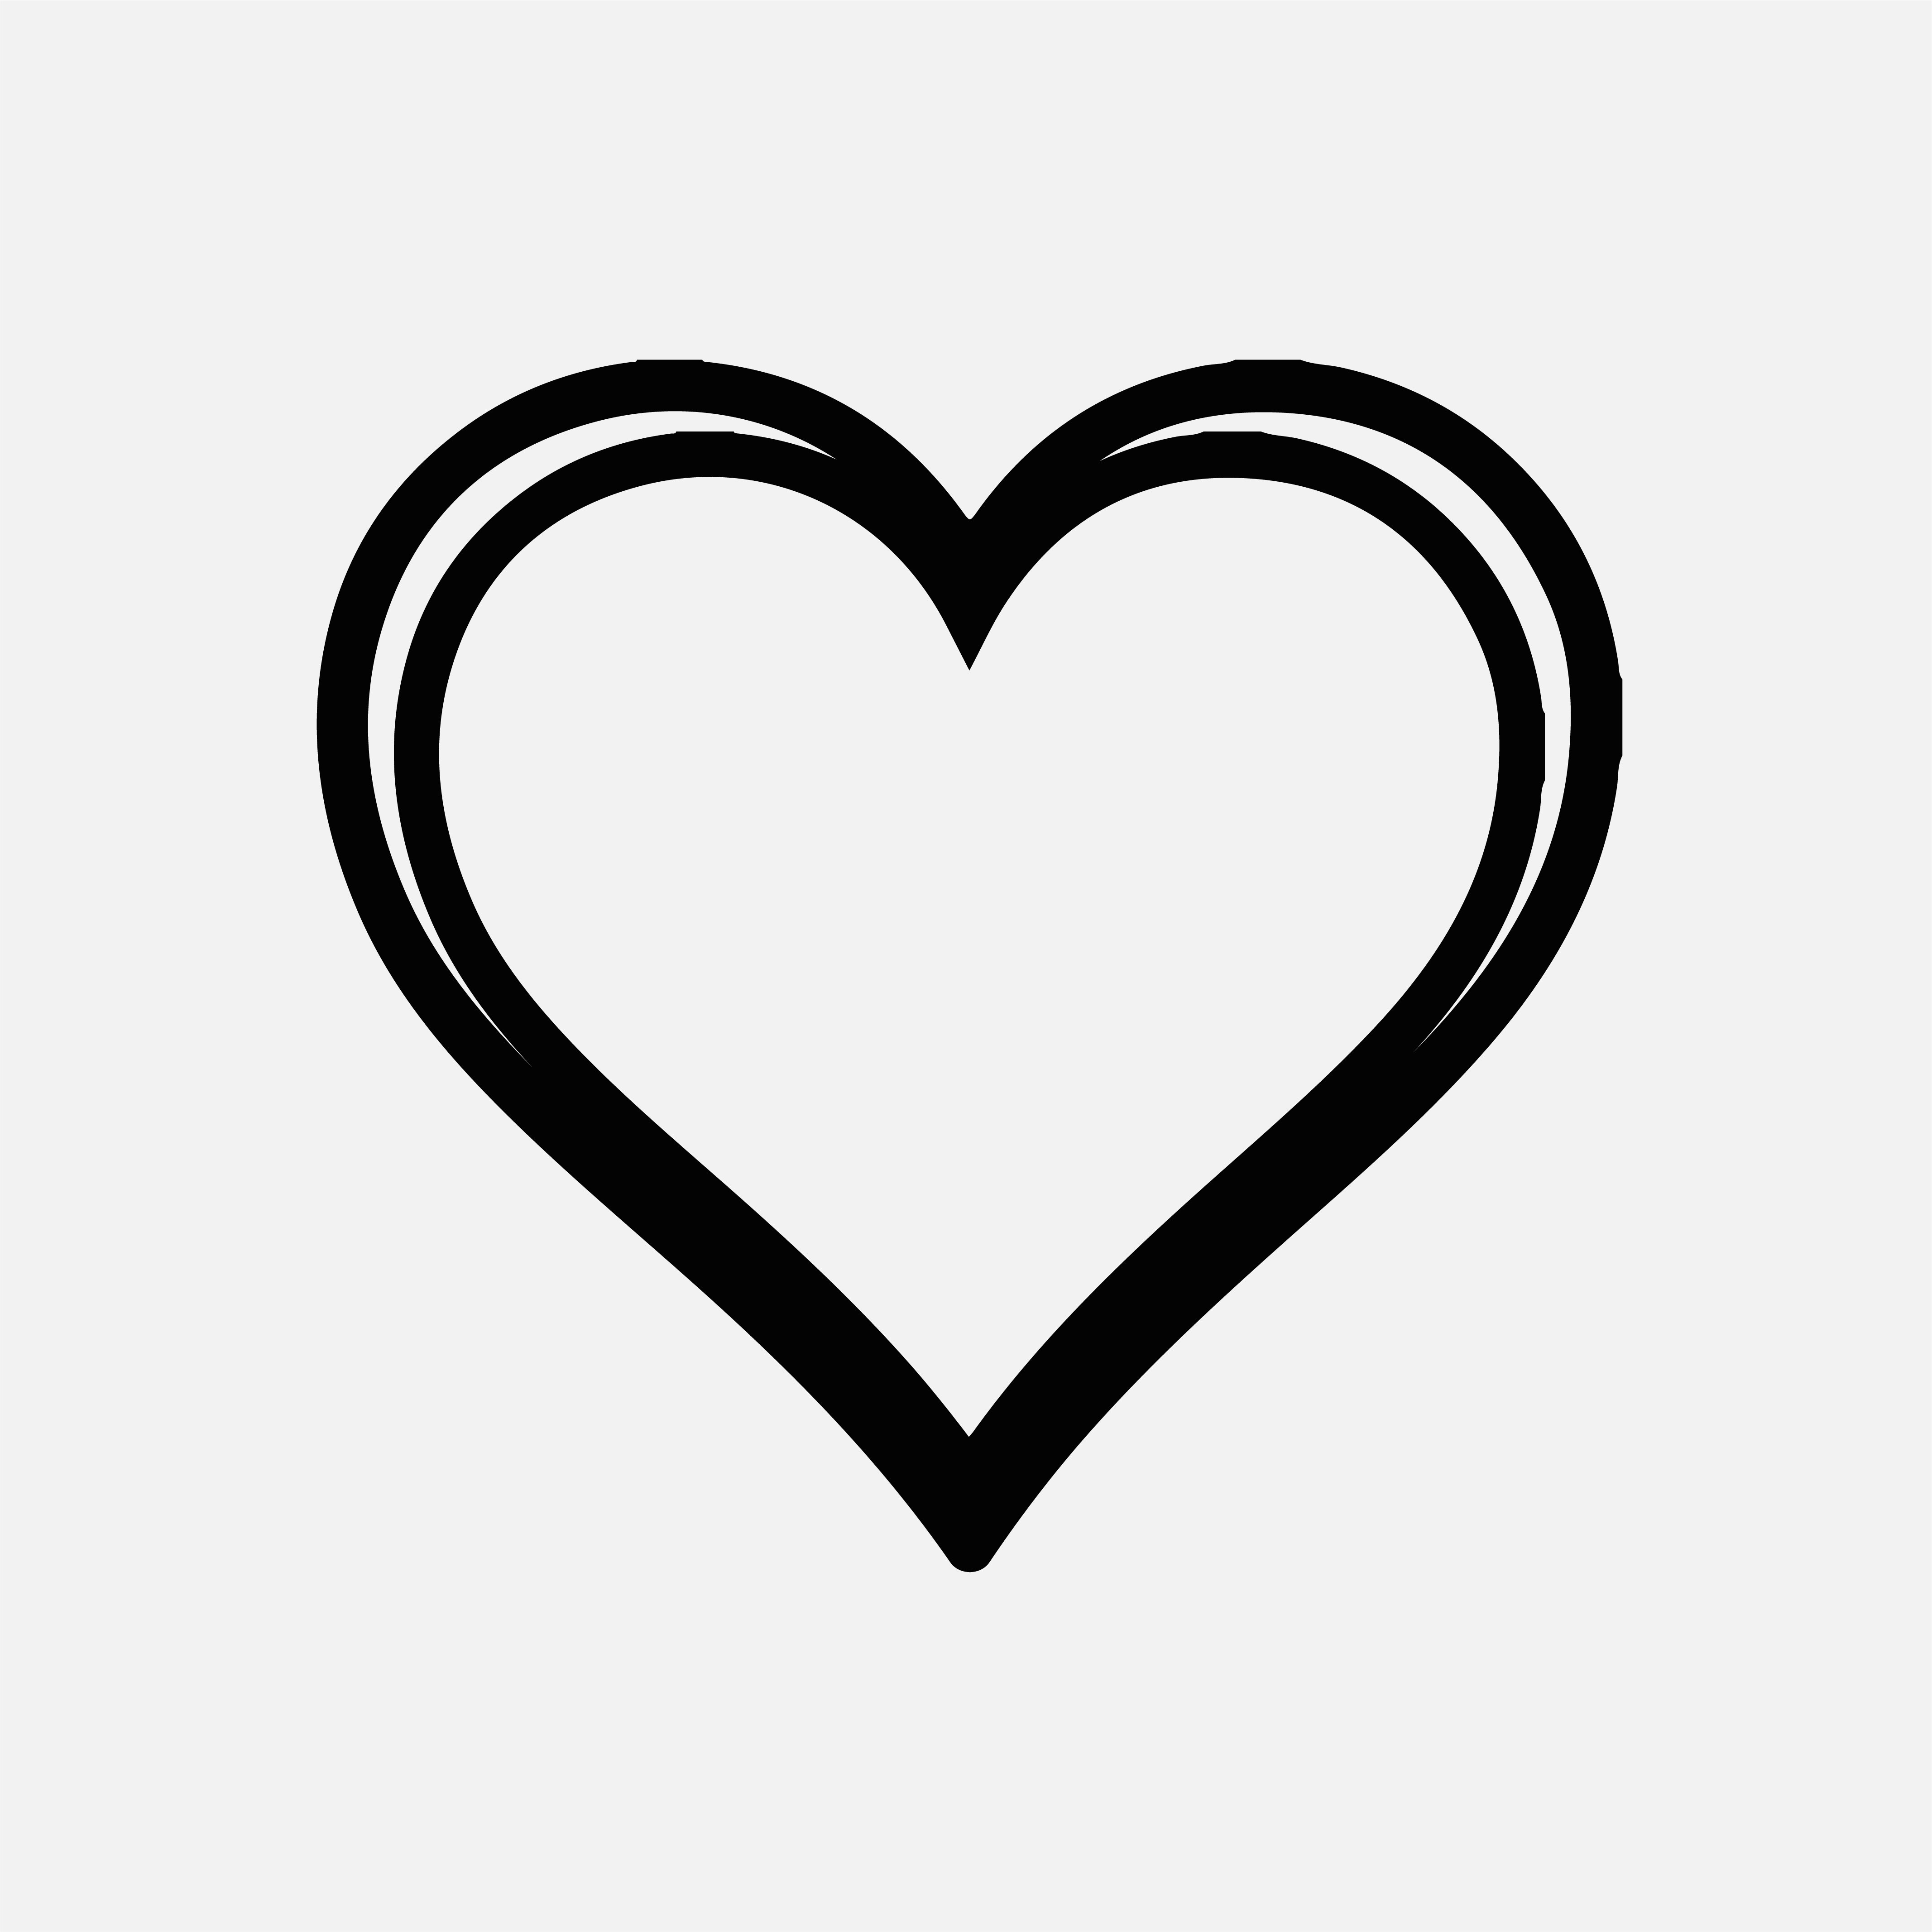 Heart Outline Clipart Black And White